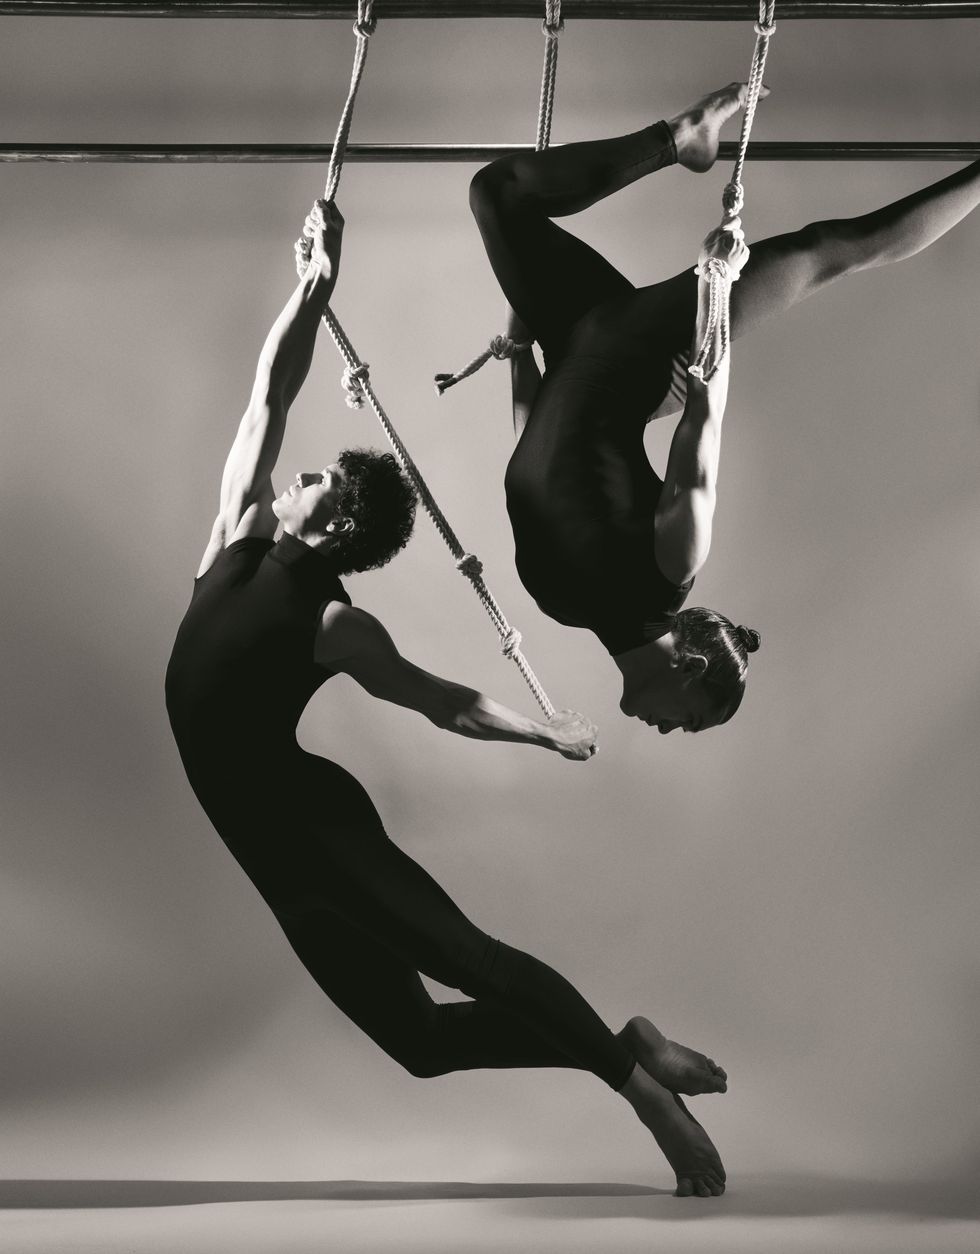 Static trapeze, Acrobatics, Aerialist, Performance, Trapeze, Circus, Athletic dance move, Black-and-white, Photography, Rope climbing, 